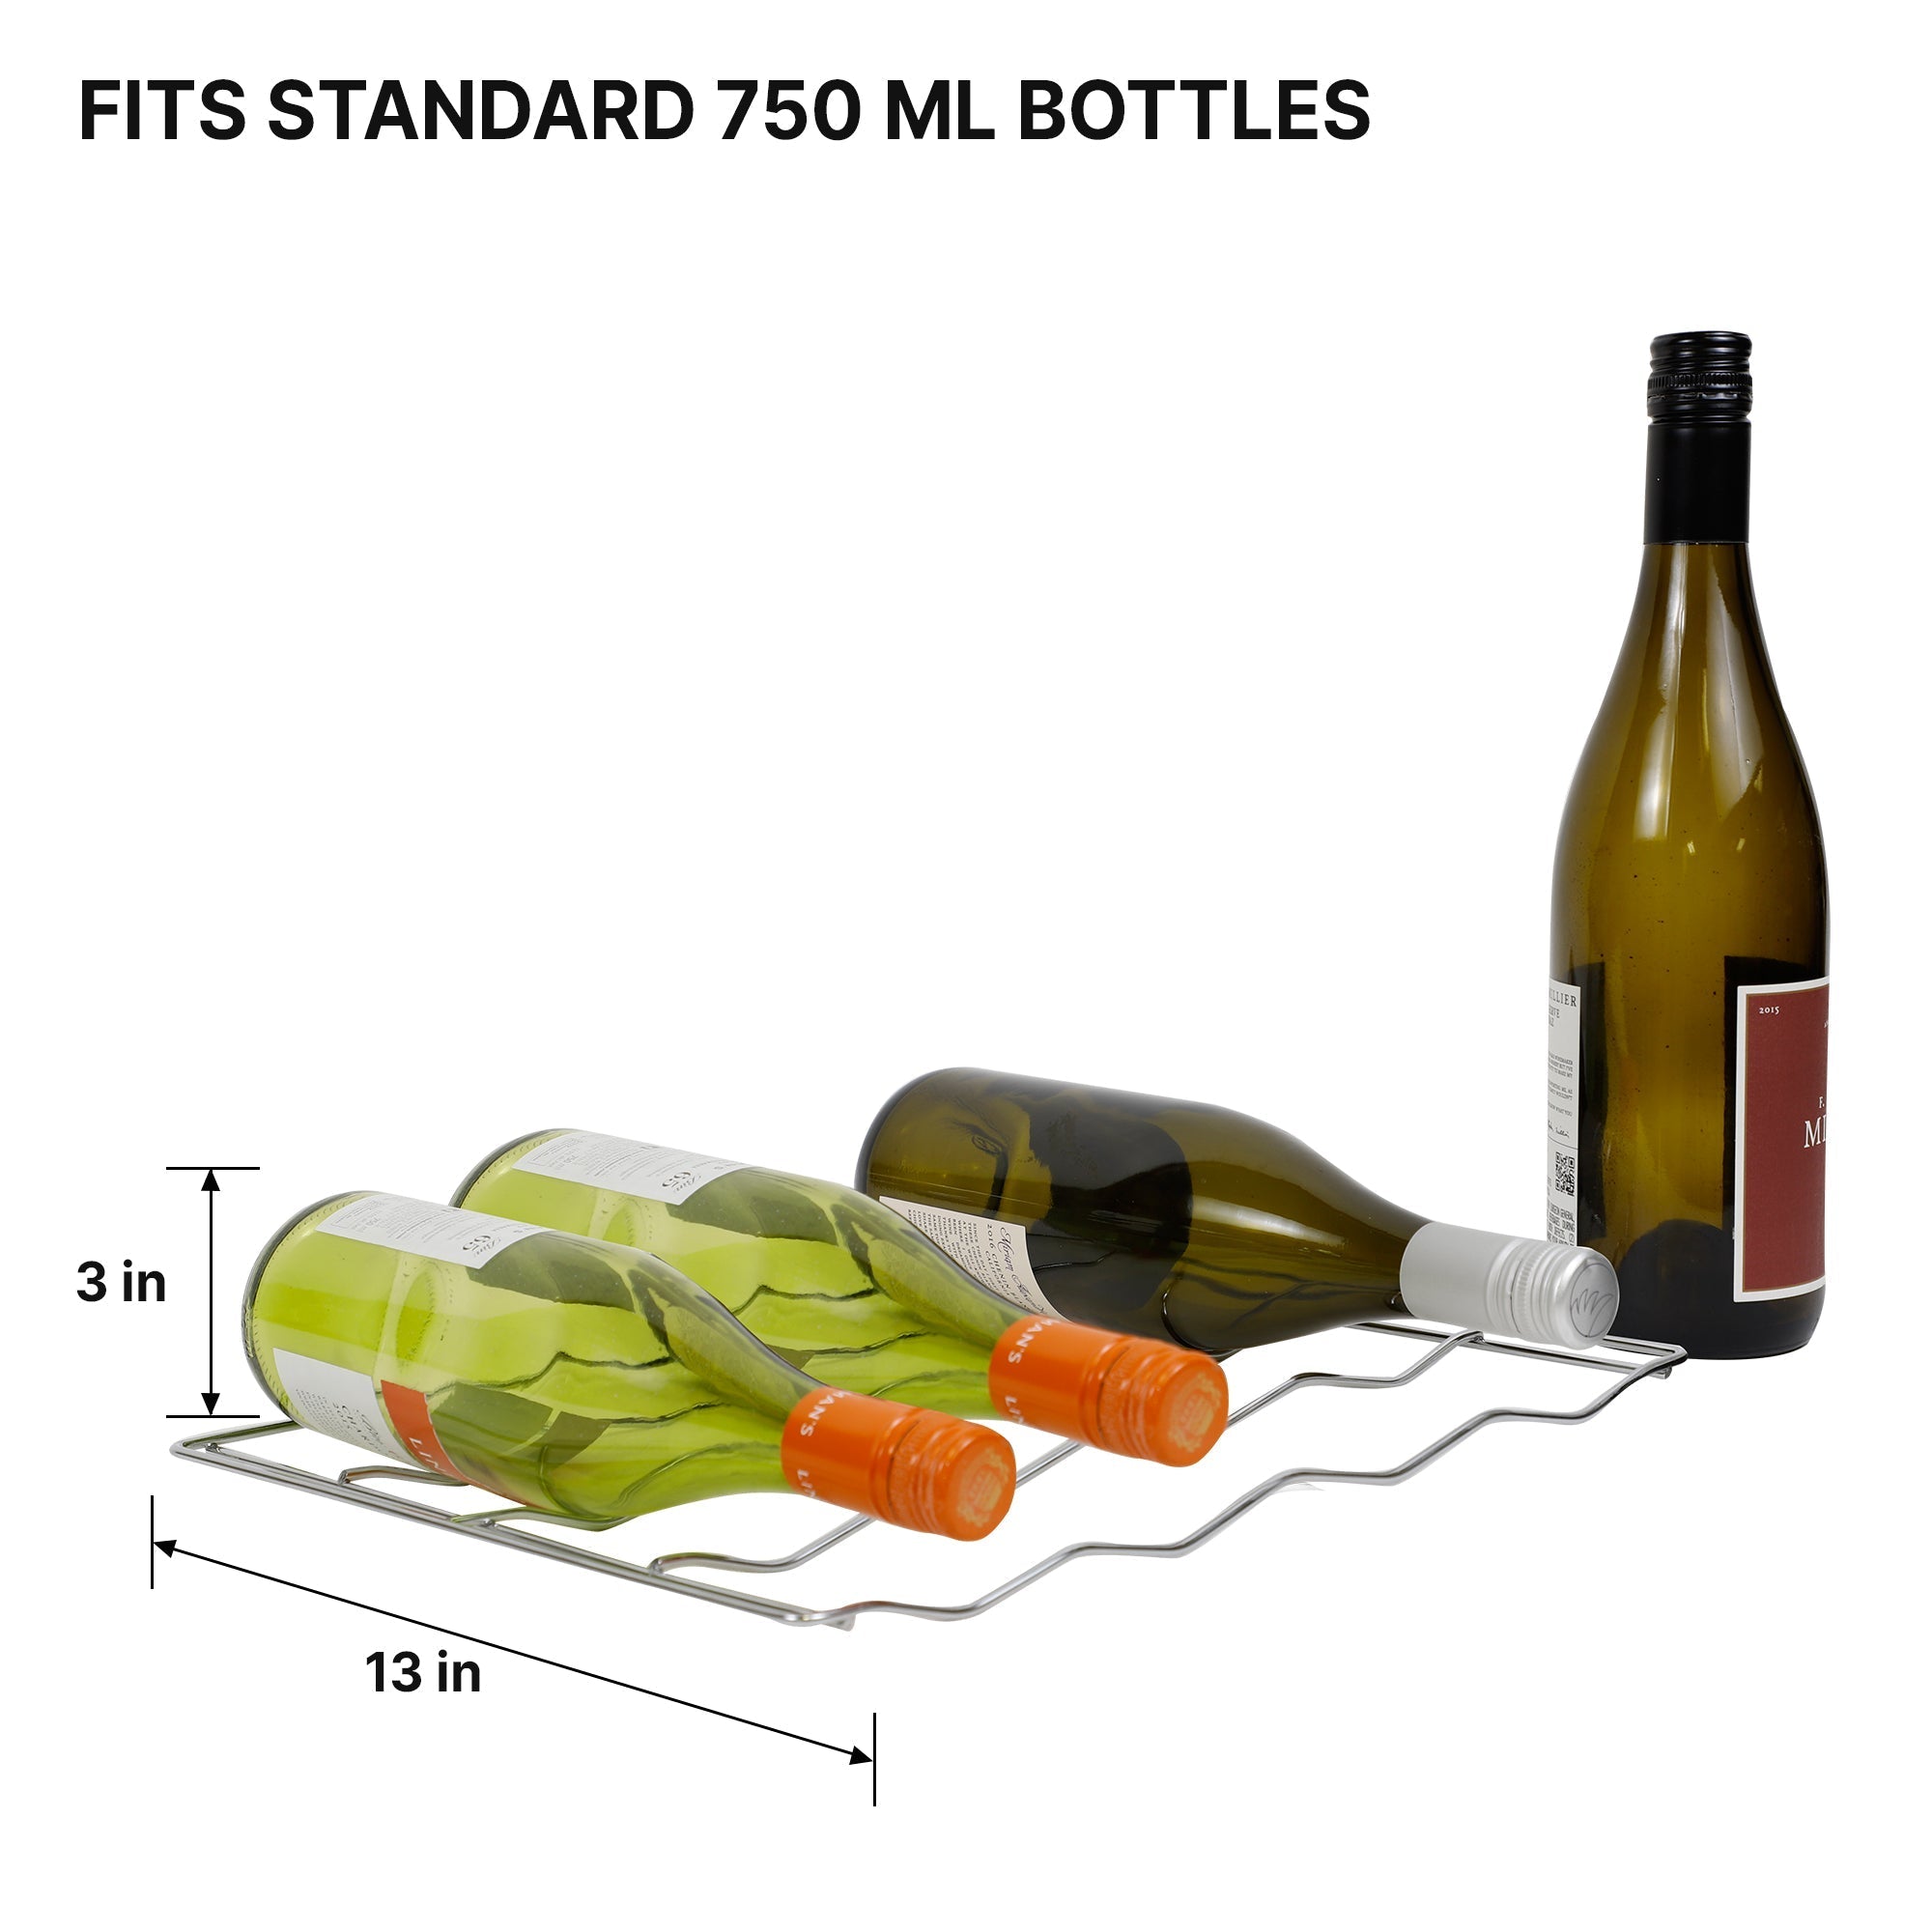 Removable wire rack from Koolatron 20 bottle wine chiller with dimensions labeled and three wine bottles lying on it and one standing up beside it. Text above reads "Fits standard 750 mL bottles"